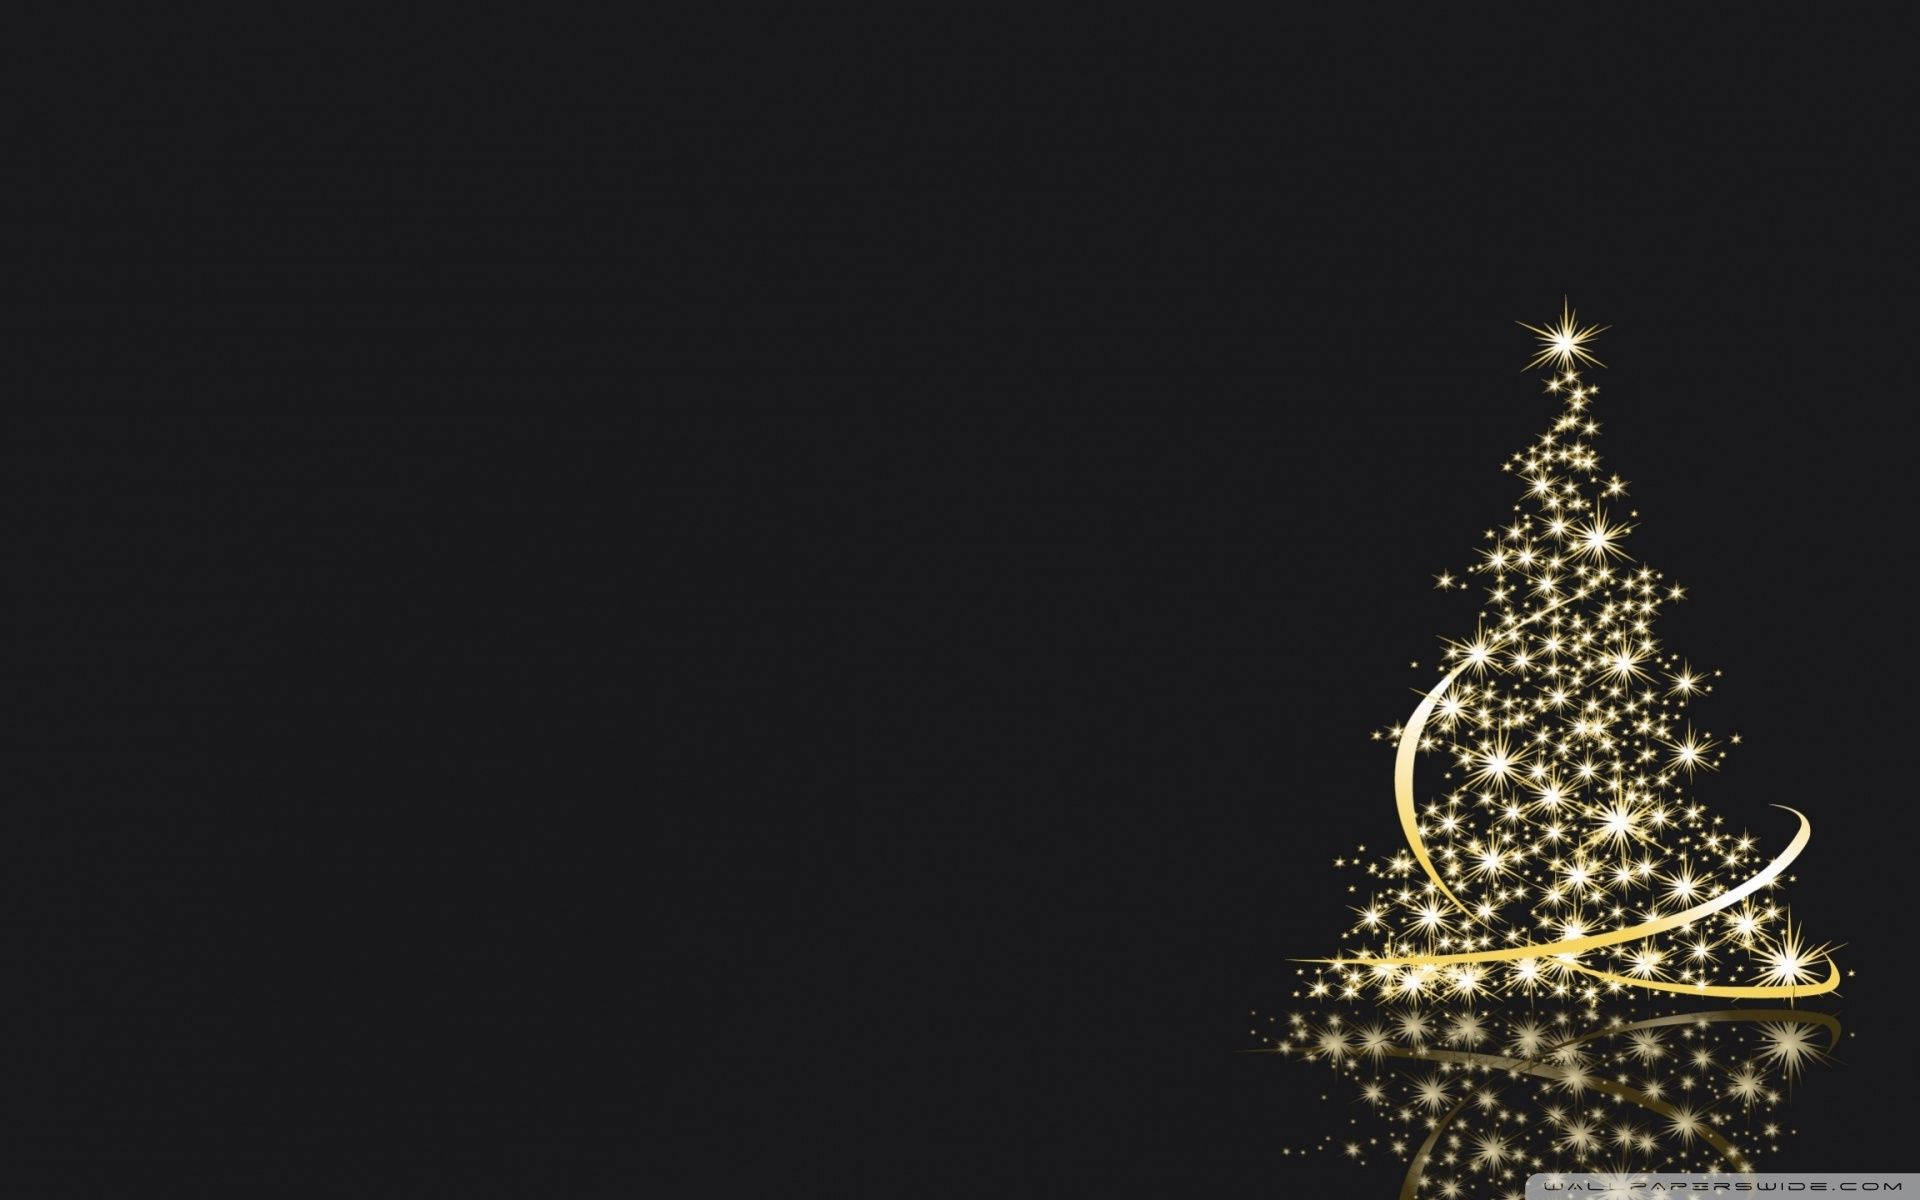 A Merry Christmas With A Black Christmas Tree Background